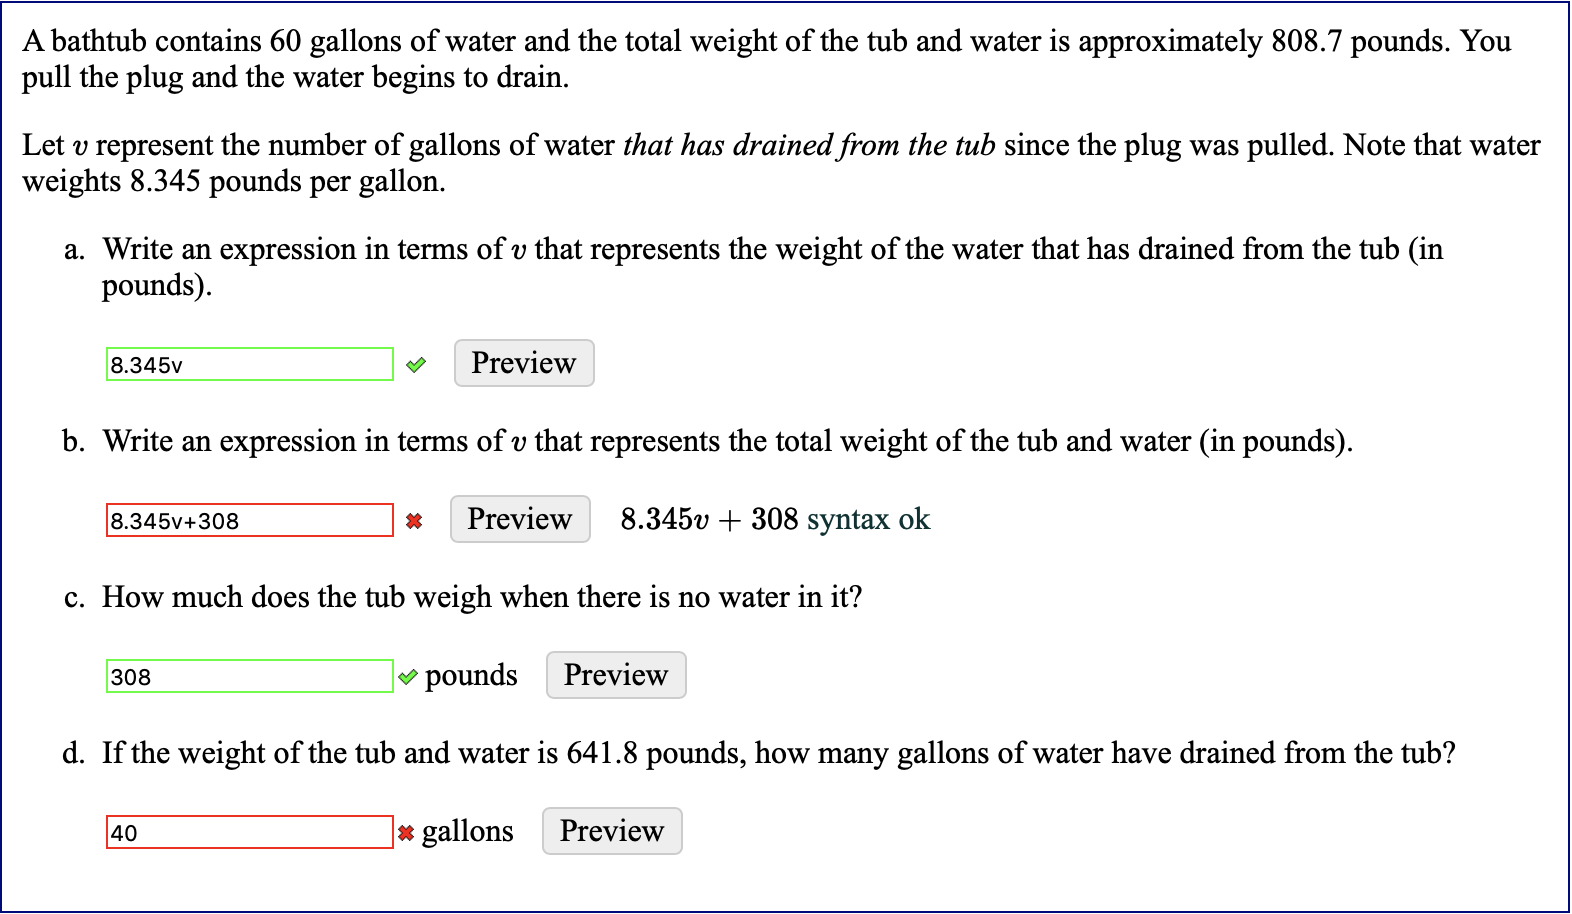 A bathtub contains 60 gallons of water and the total weight of the tub and water is approximately 808.7 pounds. You
pull the plug and the water begins to drain
Let v represent the number of gallons of water that has drained from the tub since the plug
weights 8.345 pounds per gallon.
pulled. Note that water
was
a. Write an
expression in terms of v that represents the weight of the water that has drained from the tub (in
pounds)
Preview
8.345v
b. Write an
expression in terms of v that represents the total weight of the tub and water (in pounds).
8.345v +308 syntax ok
Preview
8.345v+308
c. How much does the tub weigh when there is no water in it?
pounds
Preview
308
d. If the weight of the tub and water is 641.8 pounds, how many gallons of water have drained from the tub?
Preview
gallons
40
